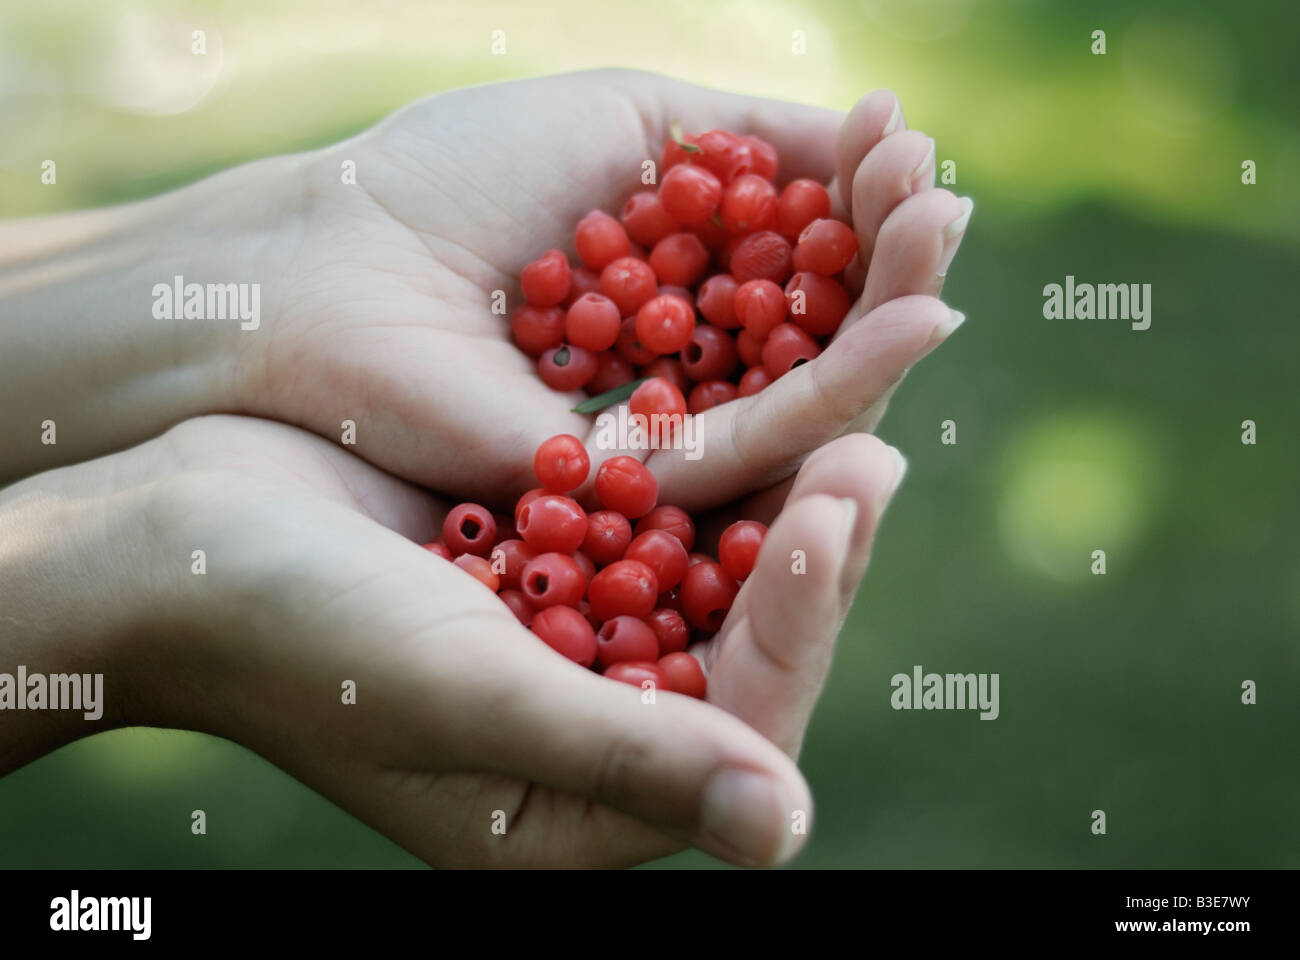 Red berry like arils of the Common yew tree Taxus baccata Stock Photo